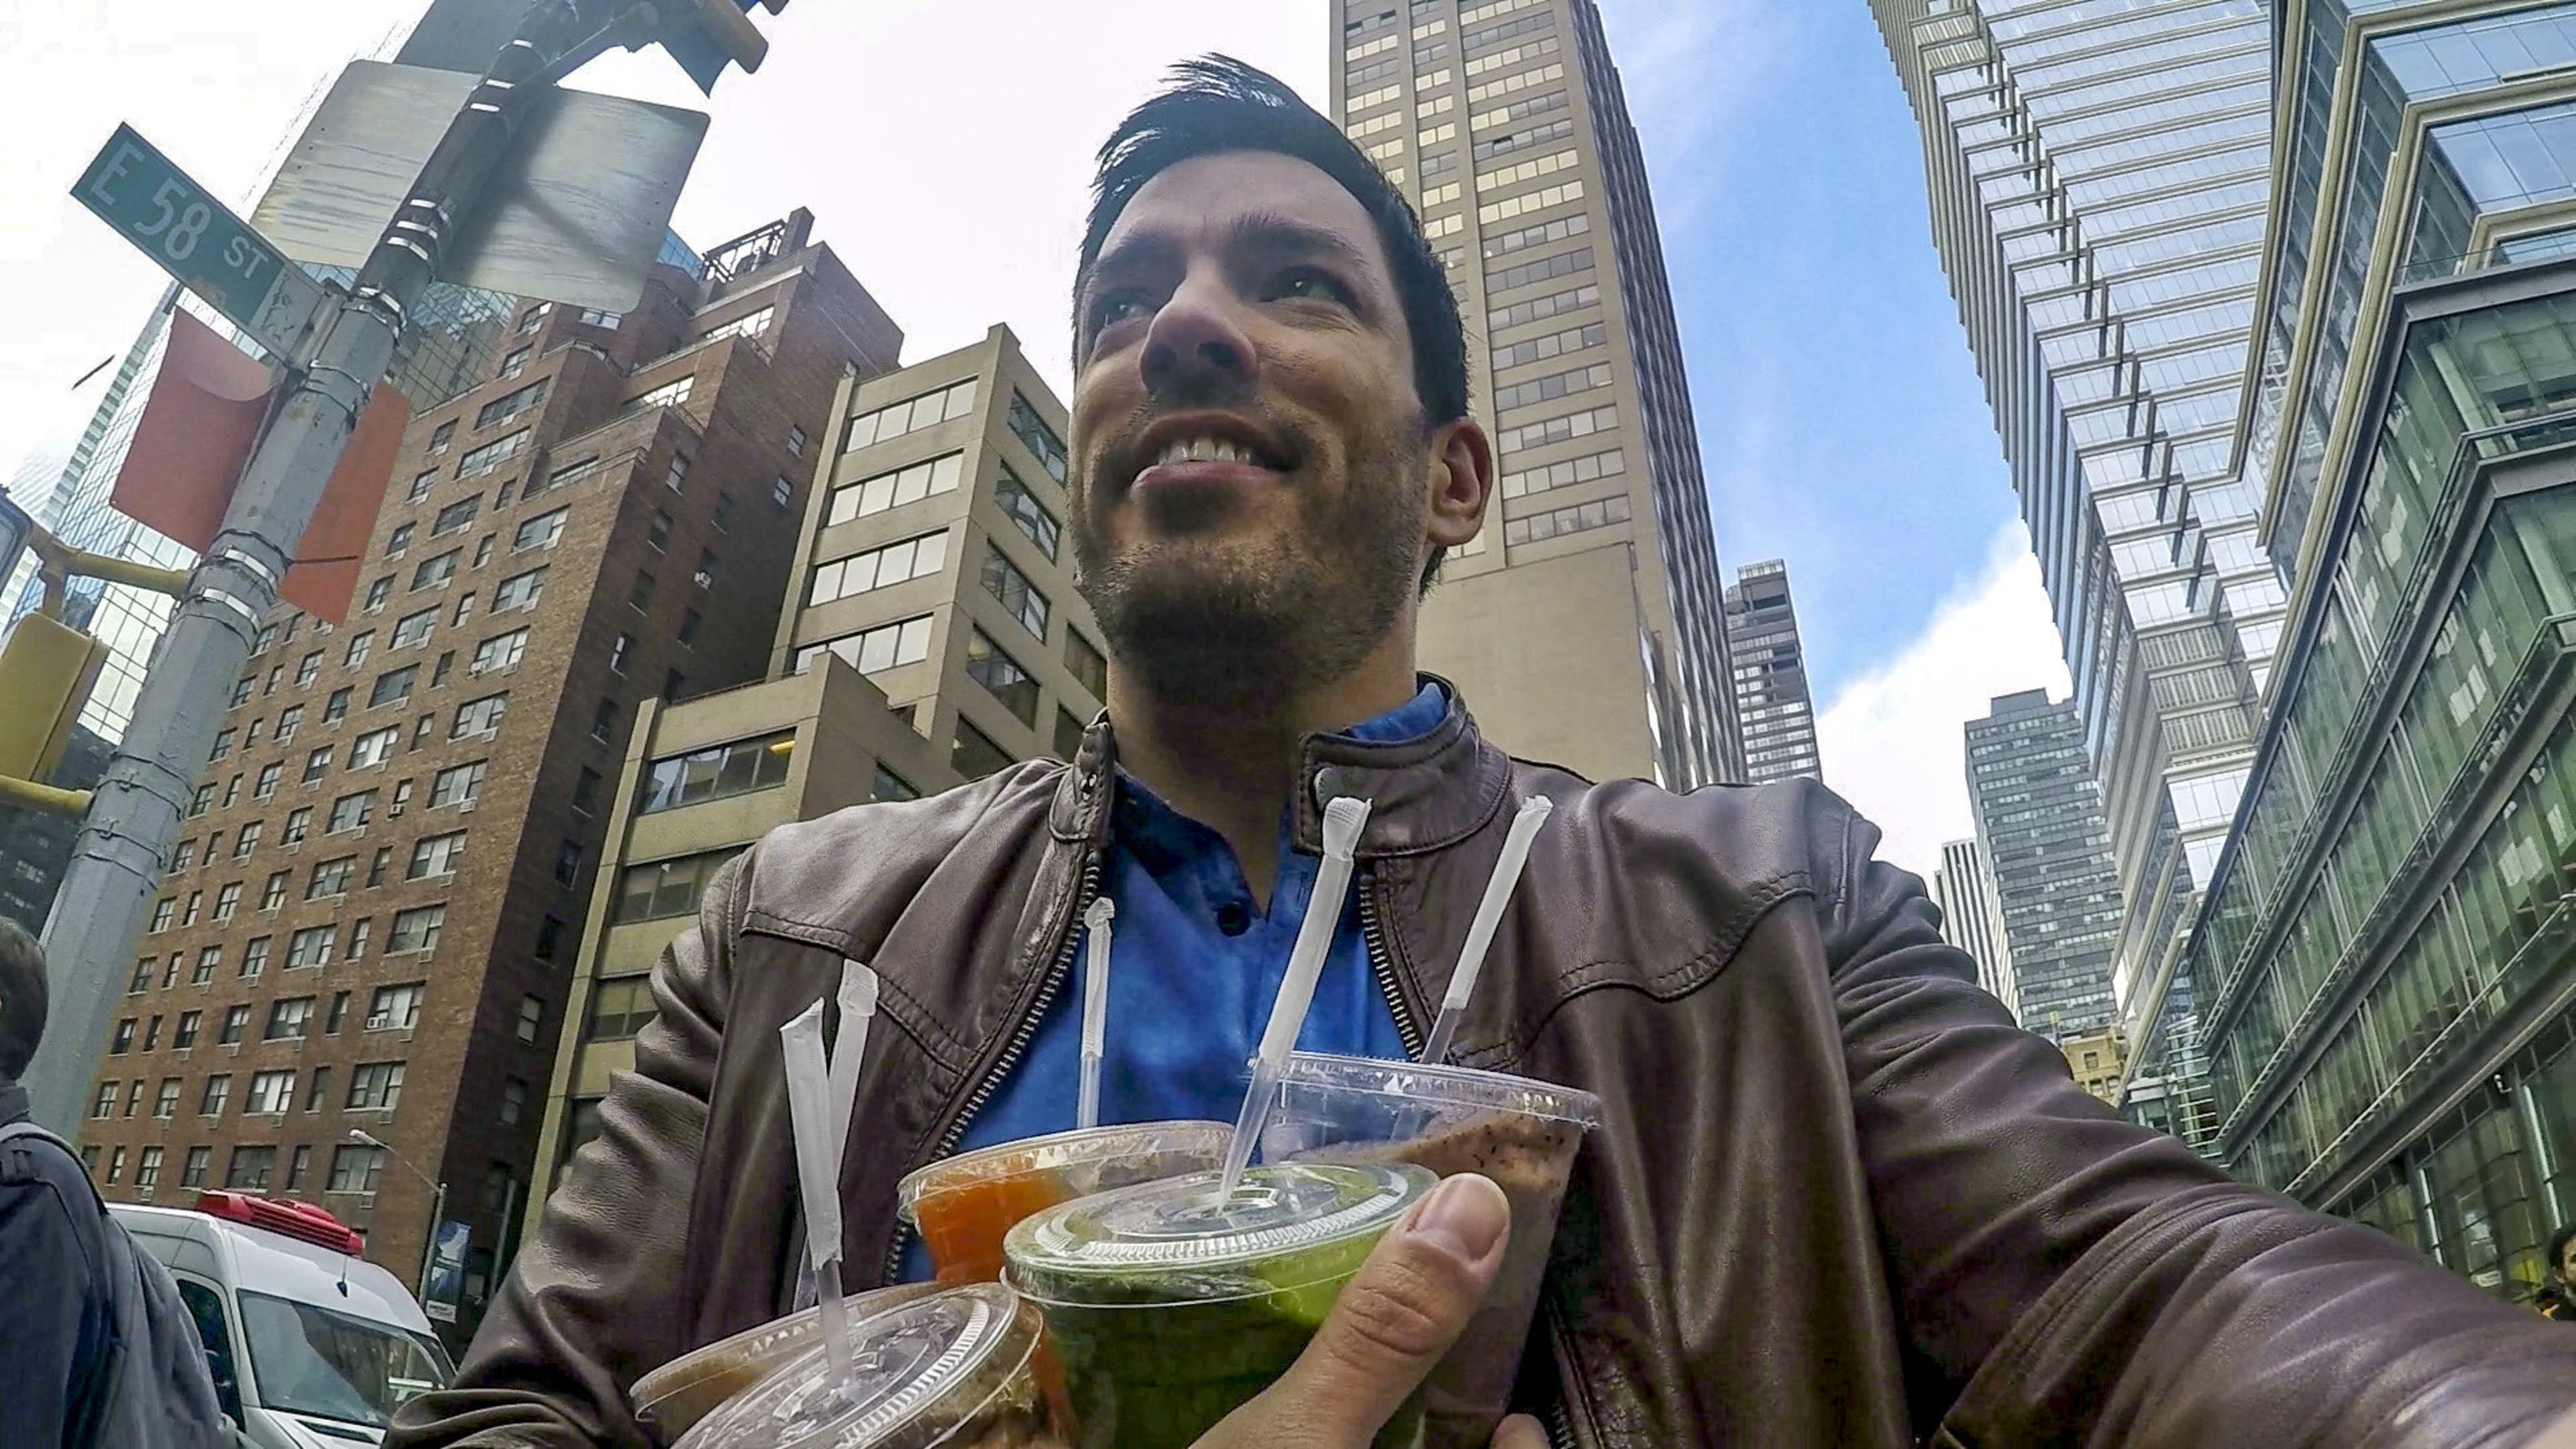 Ally's Splurge Alert app aims to help users avoid locations where they overspend. Splurge Alert sends HGTV's Drew Scott alerts when he nears the smoothie store.